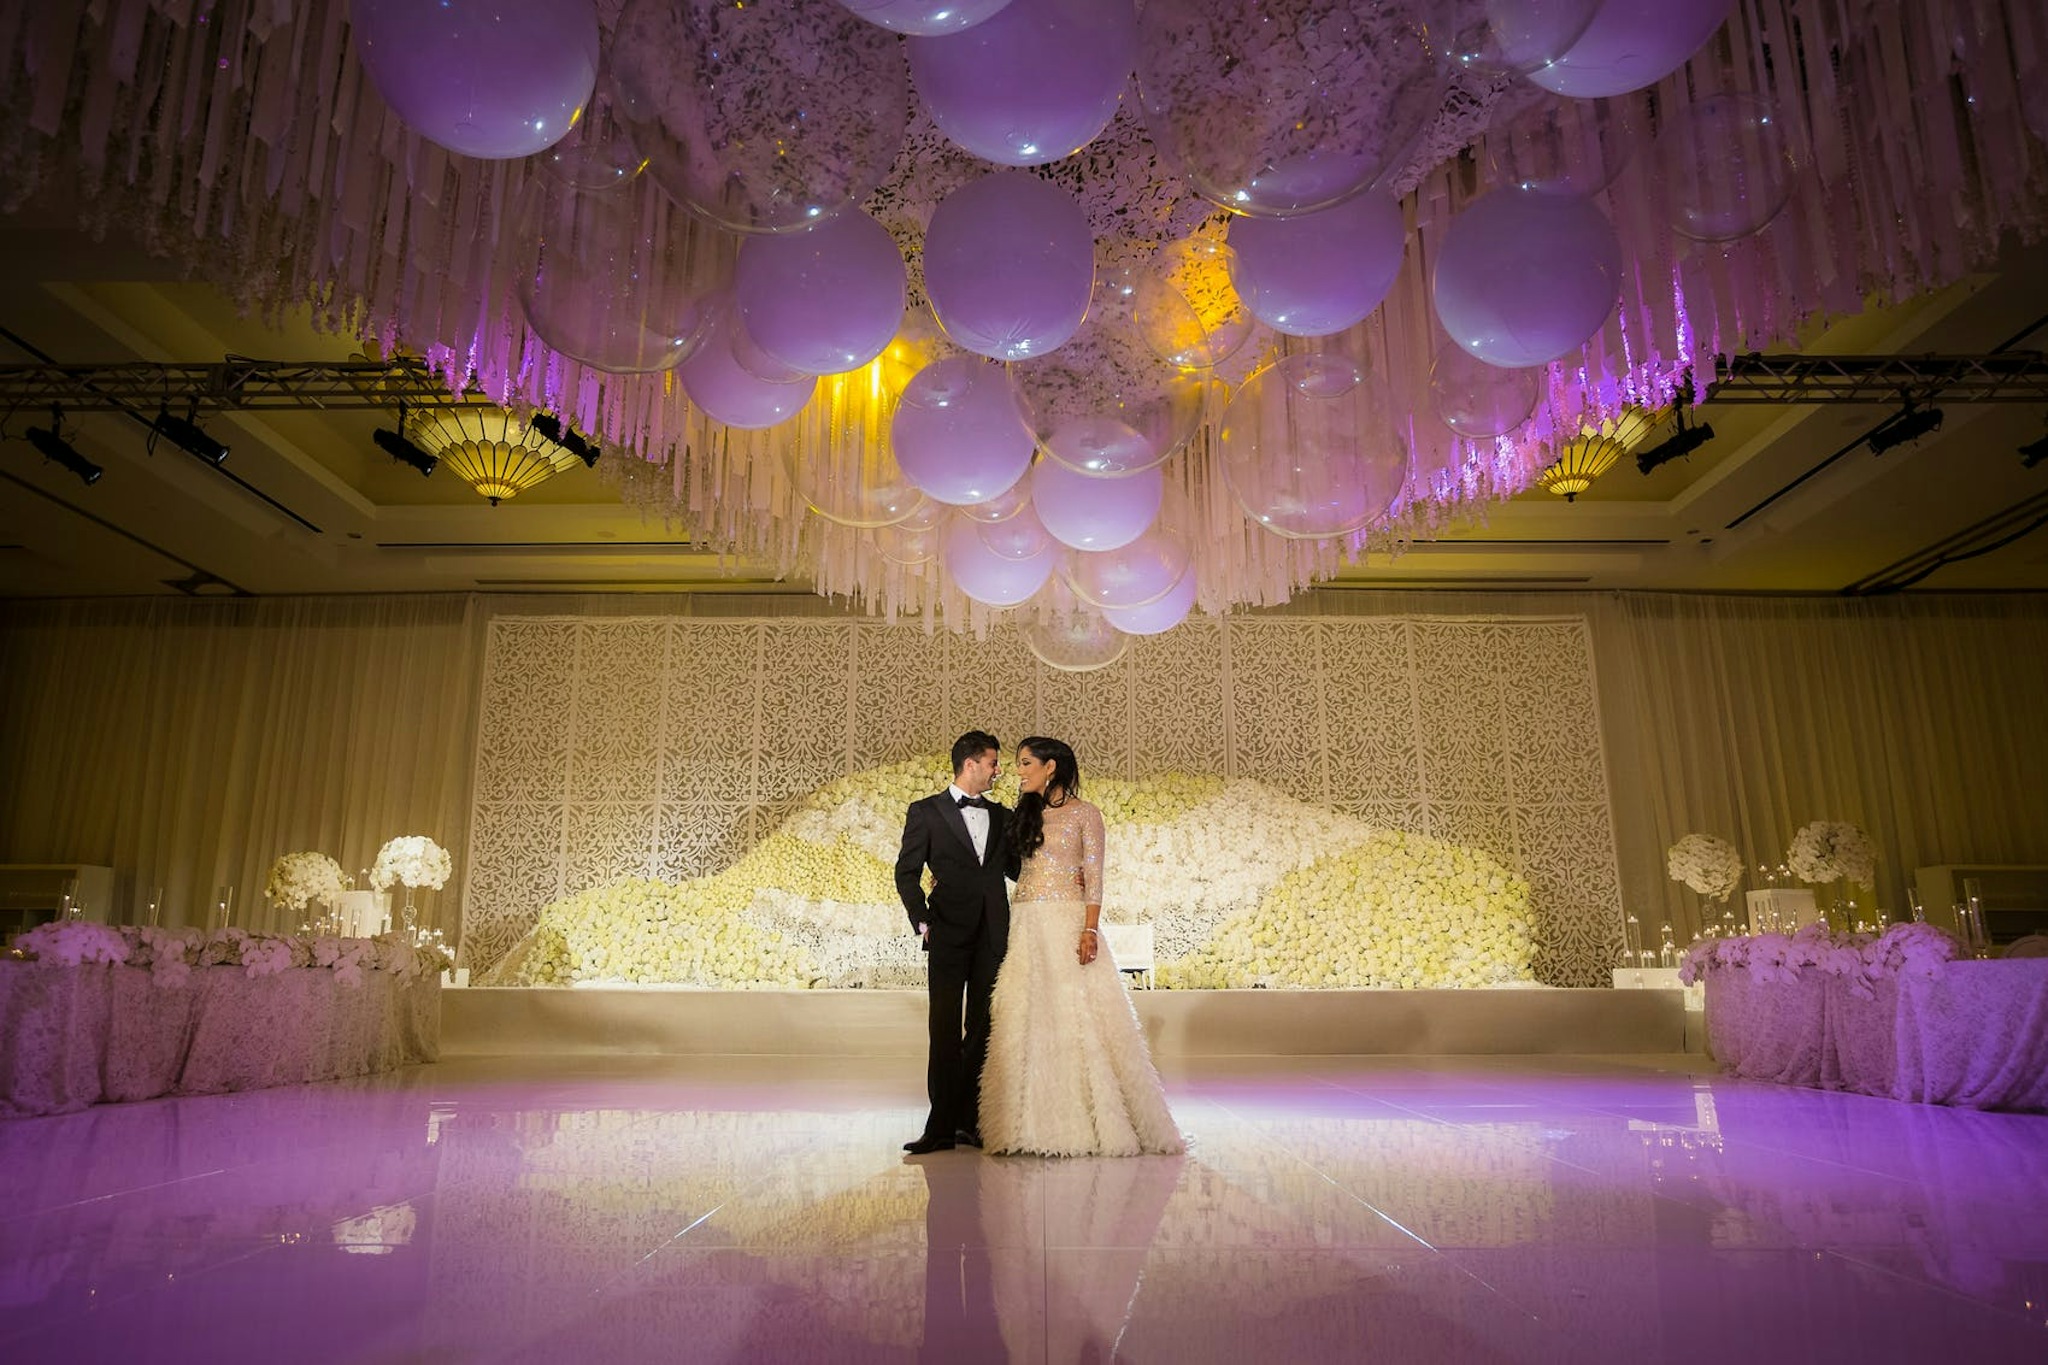 10 Wedding Ceiling Decorations That Will Wow Your Guests